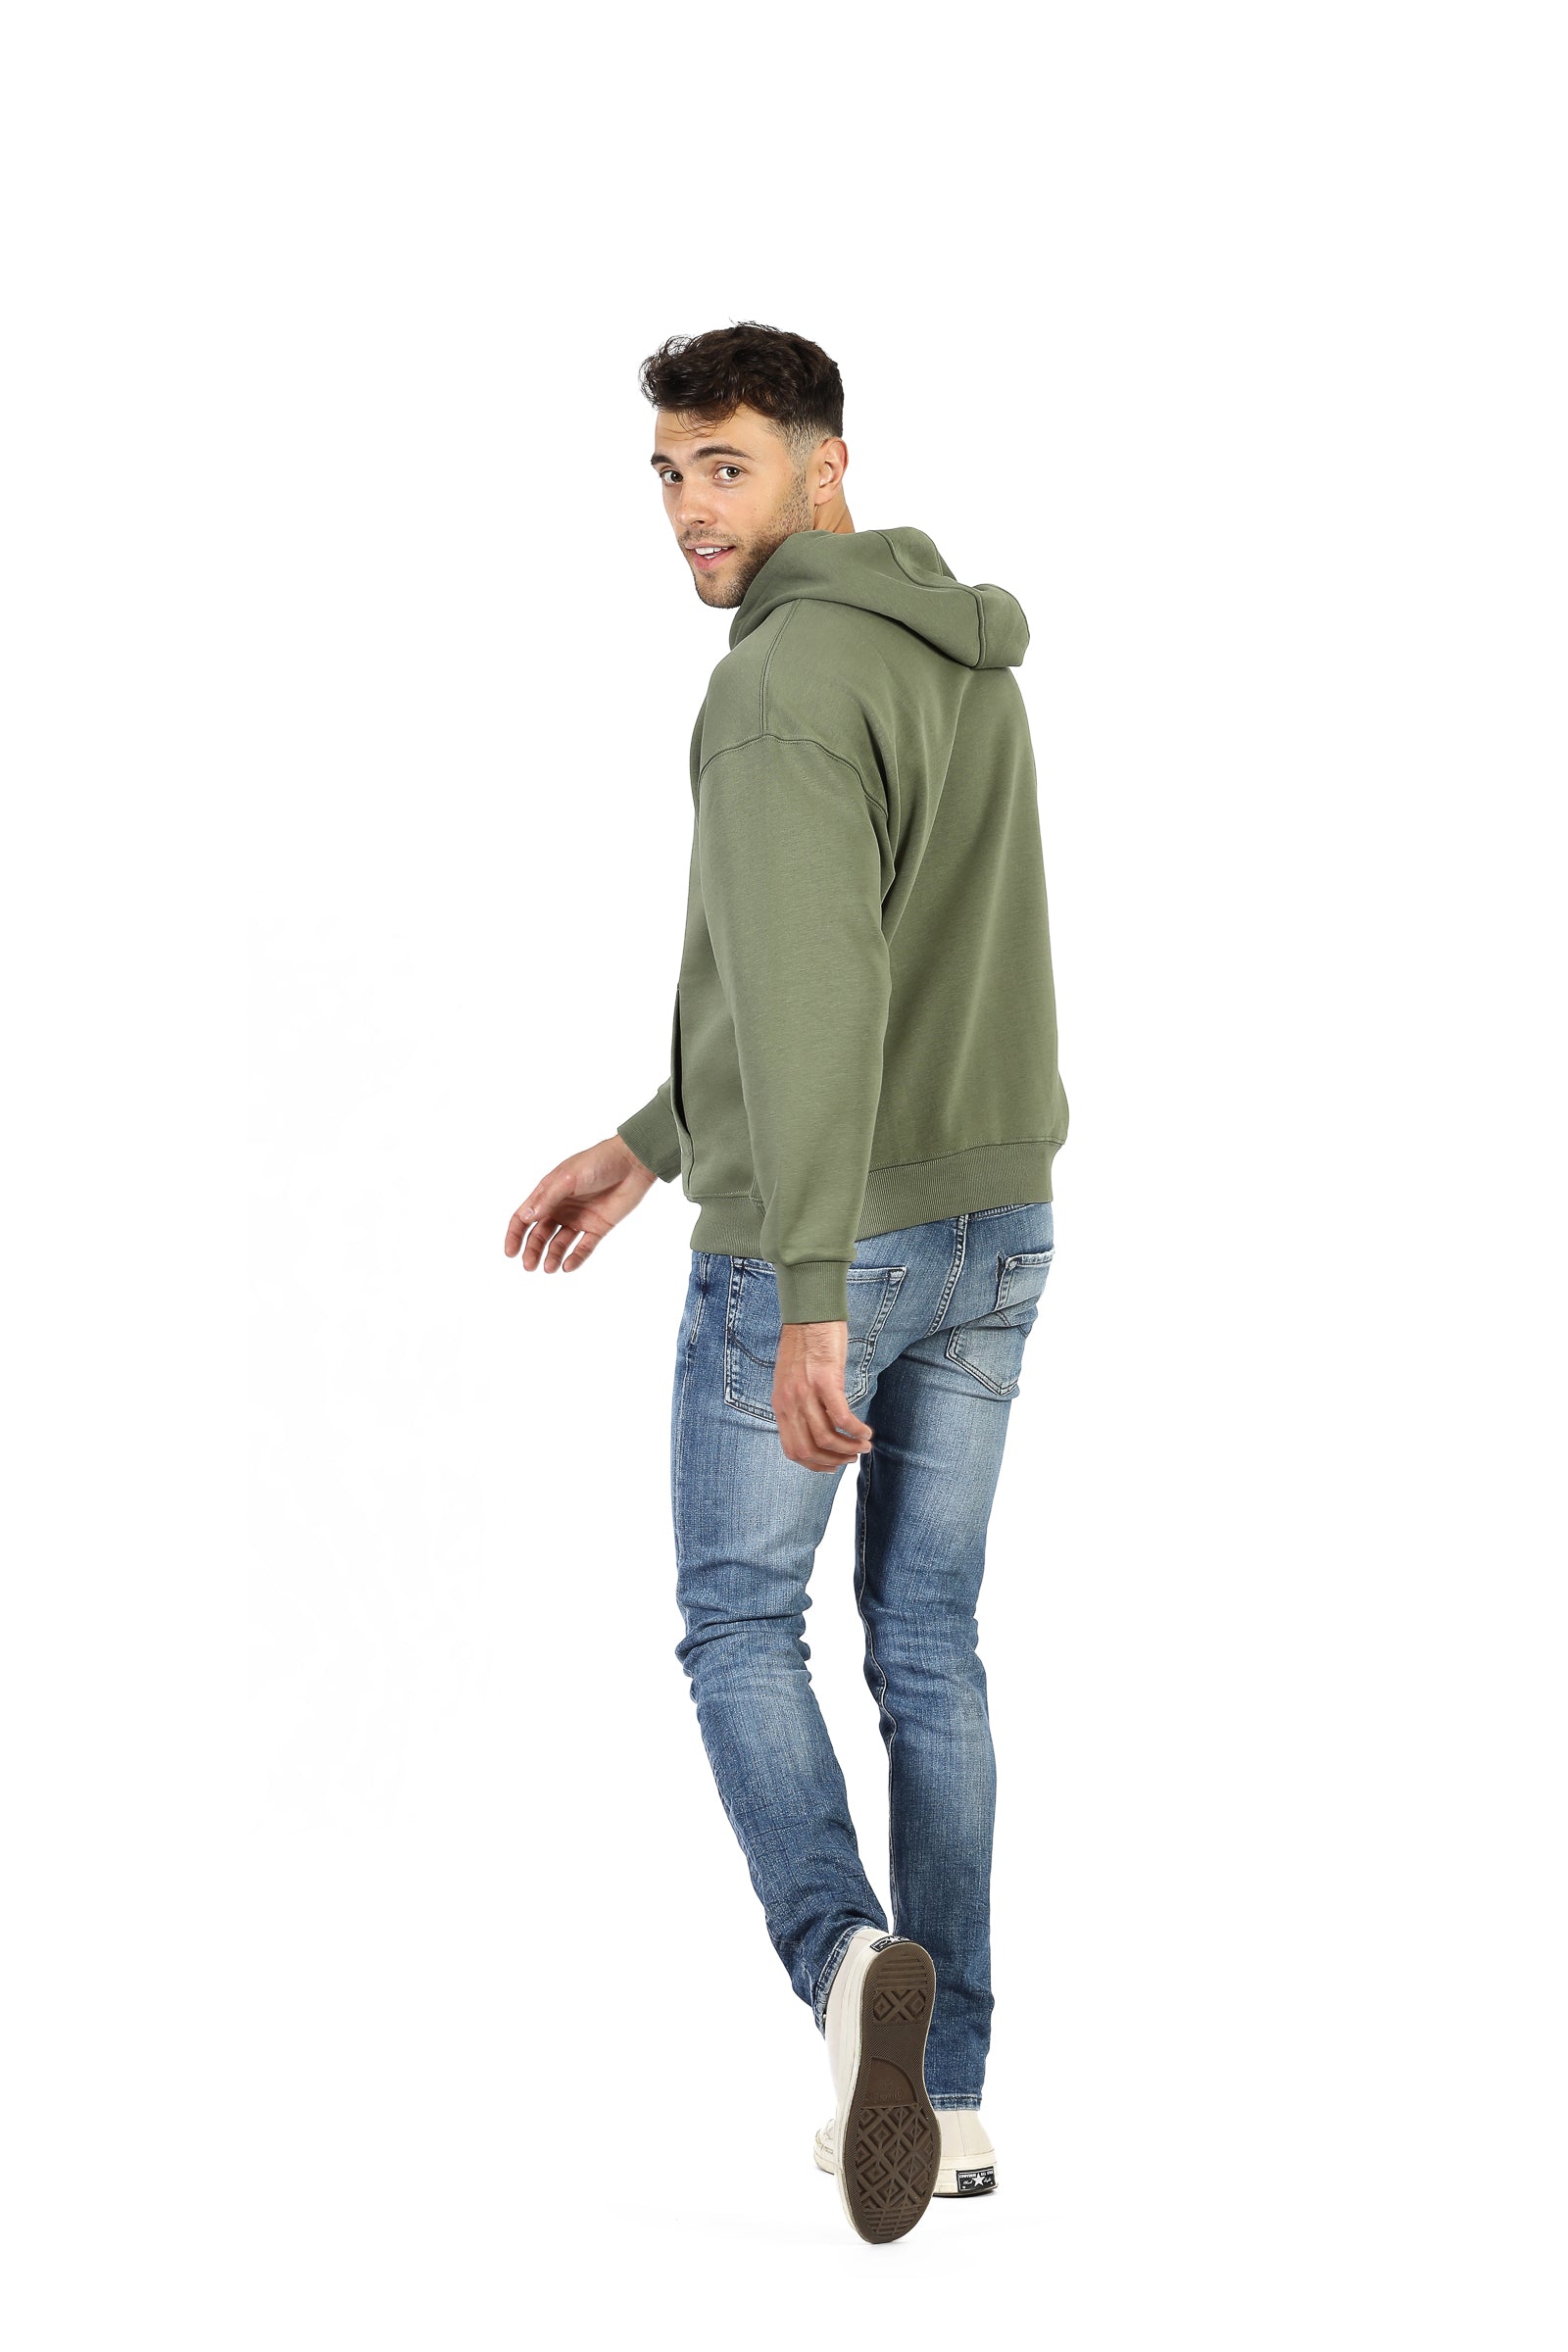 Cheeky relaxed hoodie in olive